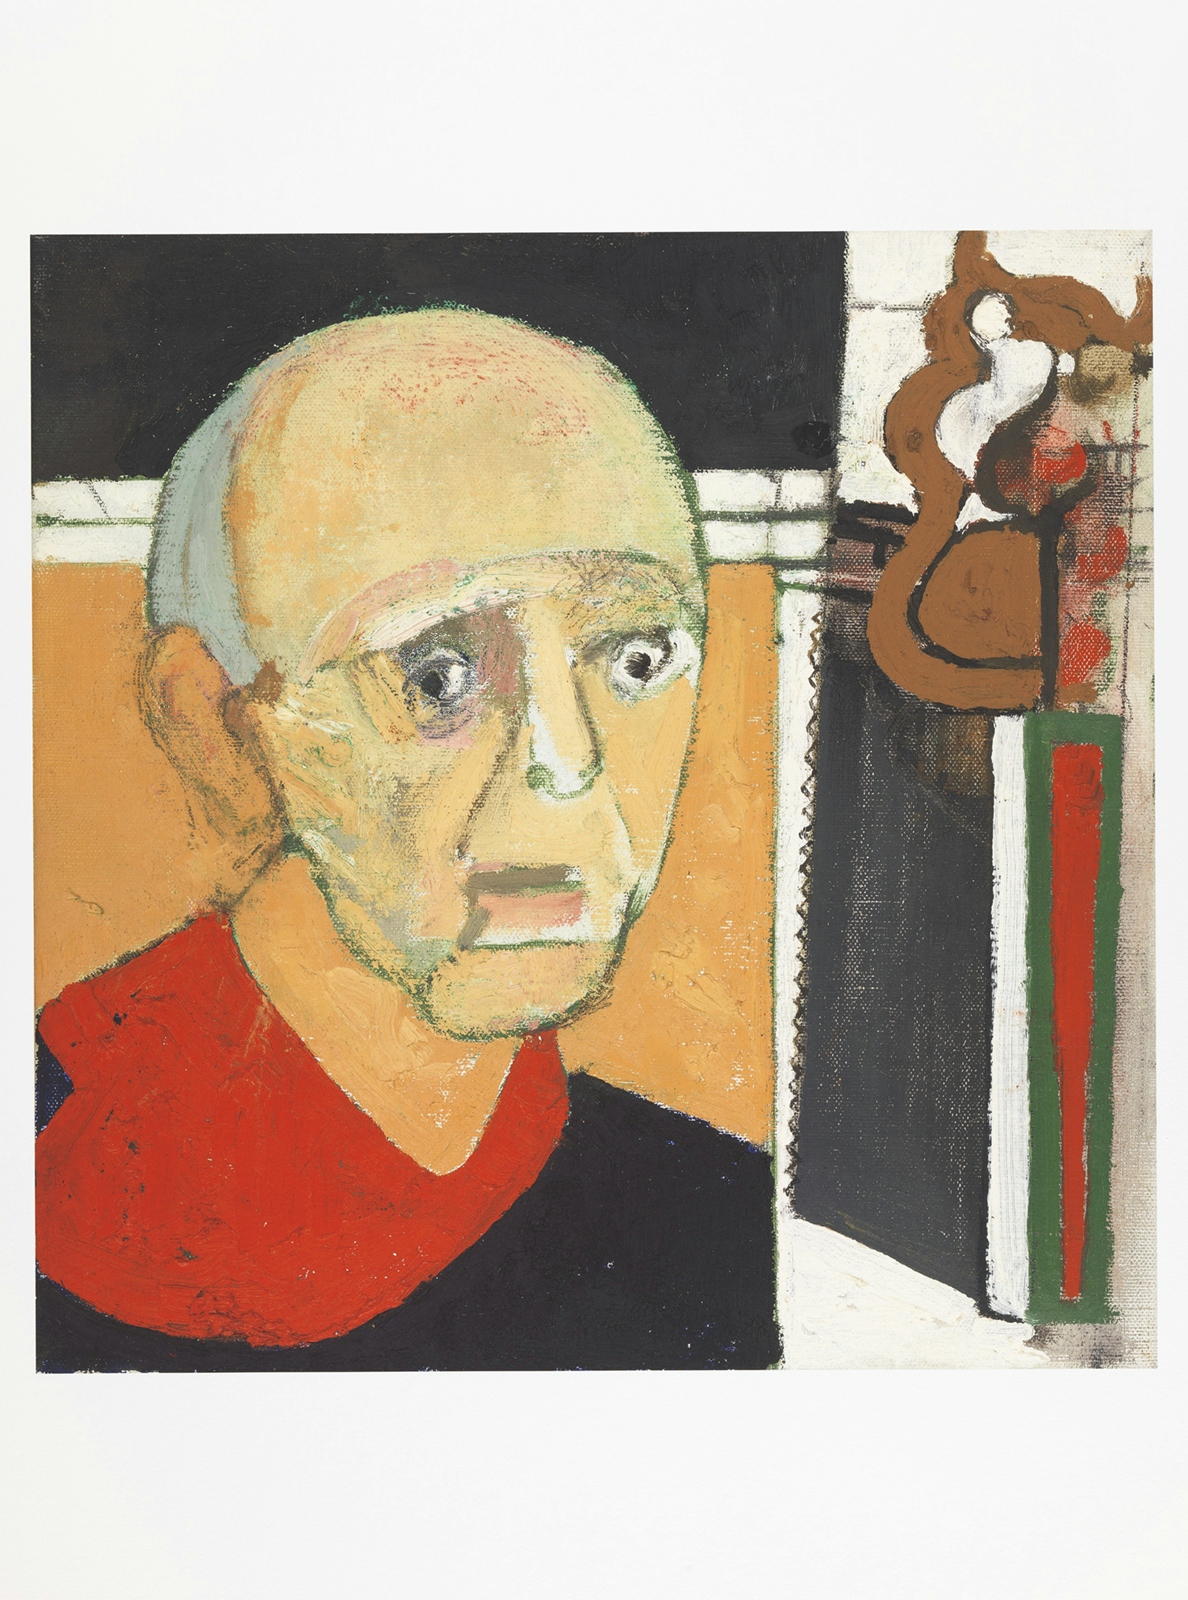 Digital reproduction  of giclee print made by William Utermohlen. It shows the head and shoulders of a man, with a large handsaw on the right hand side.